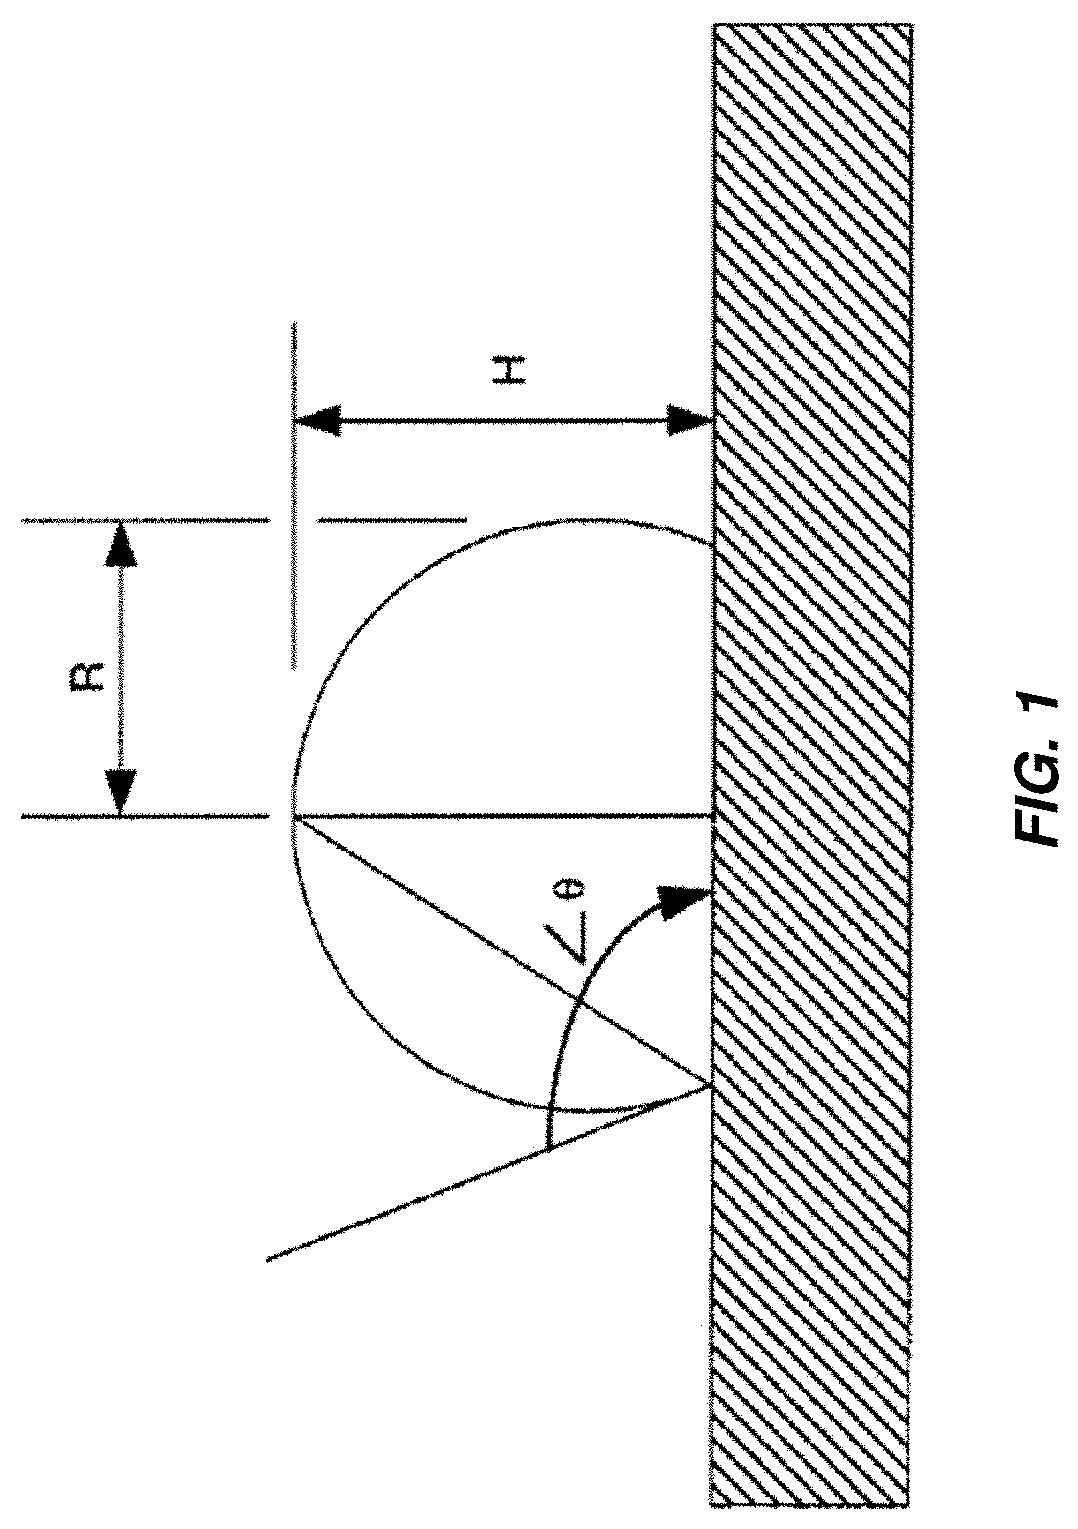 Compositions on plasma-treated surfaces